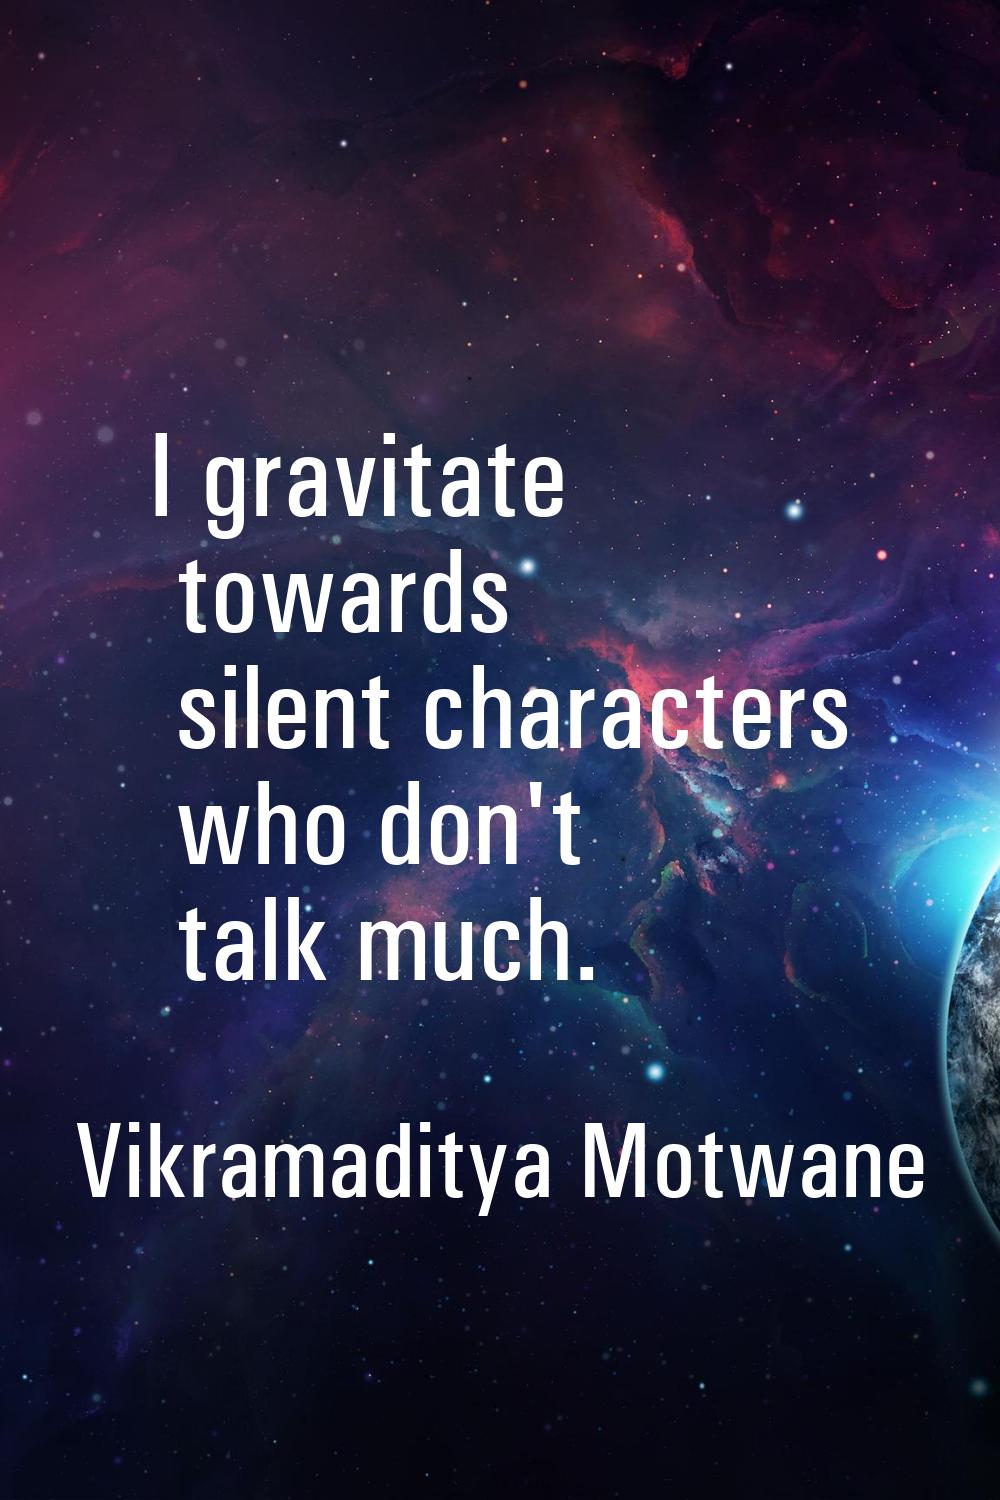 I gravitate towards silent characters who don't talk much.